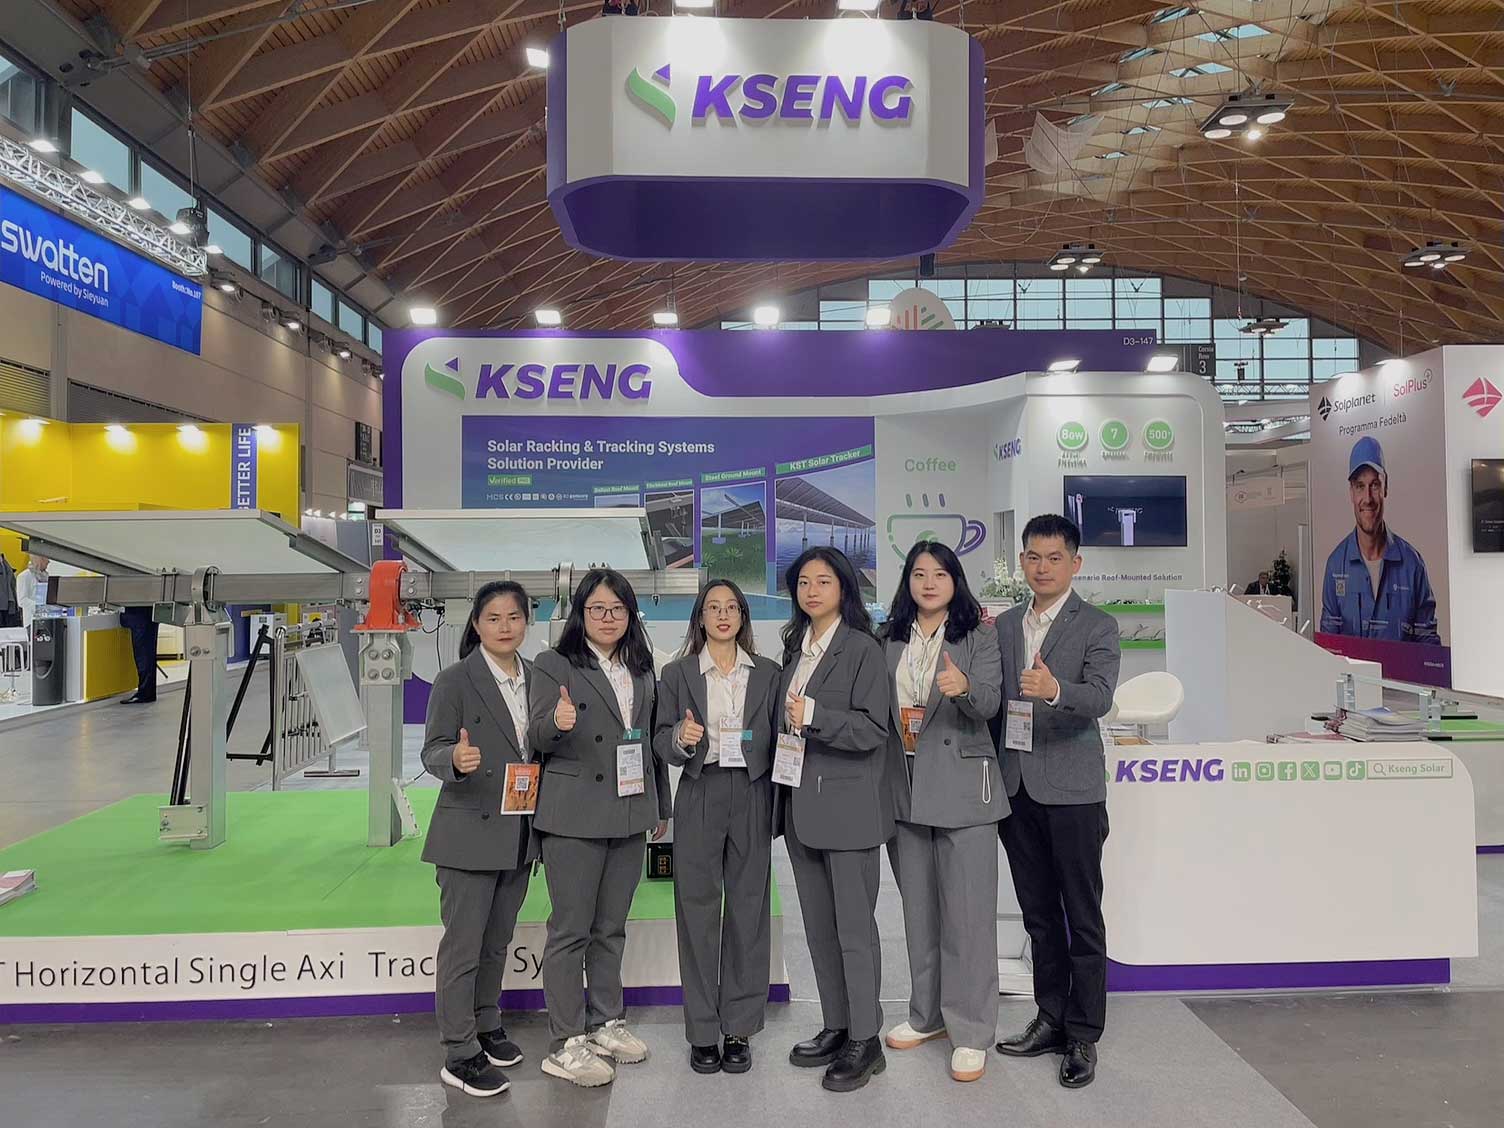 Kseng Solar Makes a Remarkable Impression at Five Expos in Europe with its Innovative Solar Racking Solutions